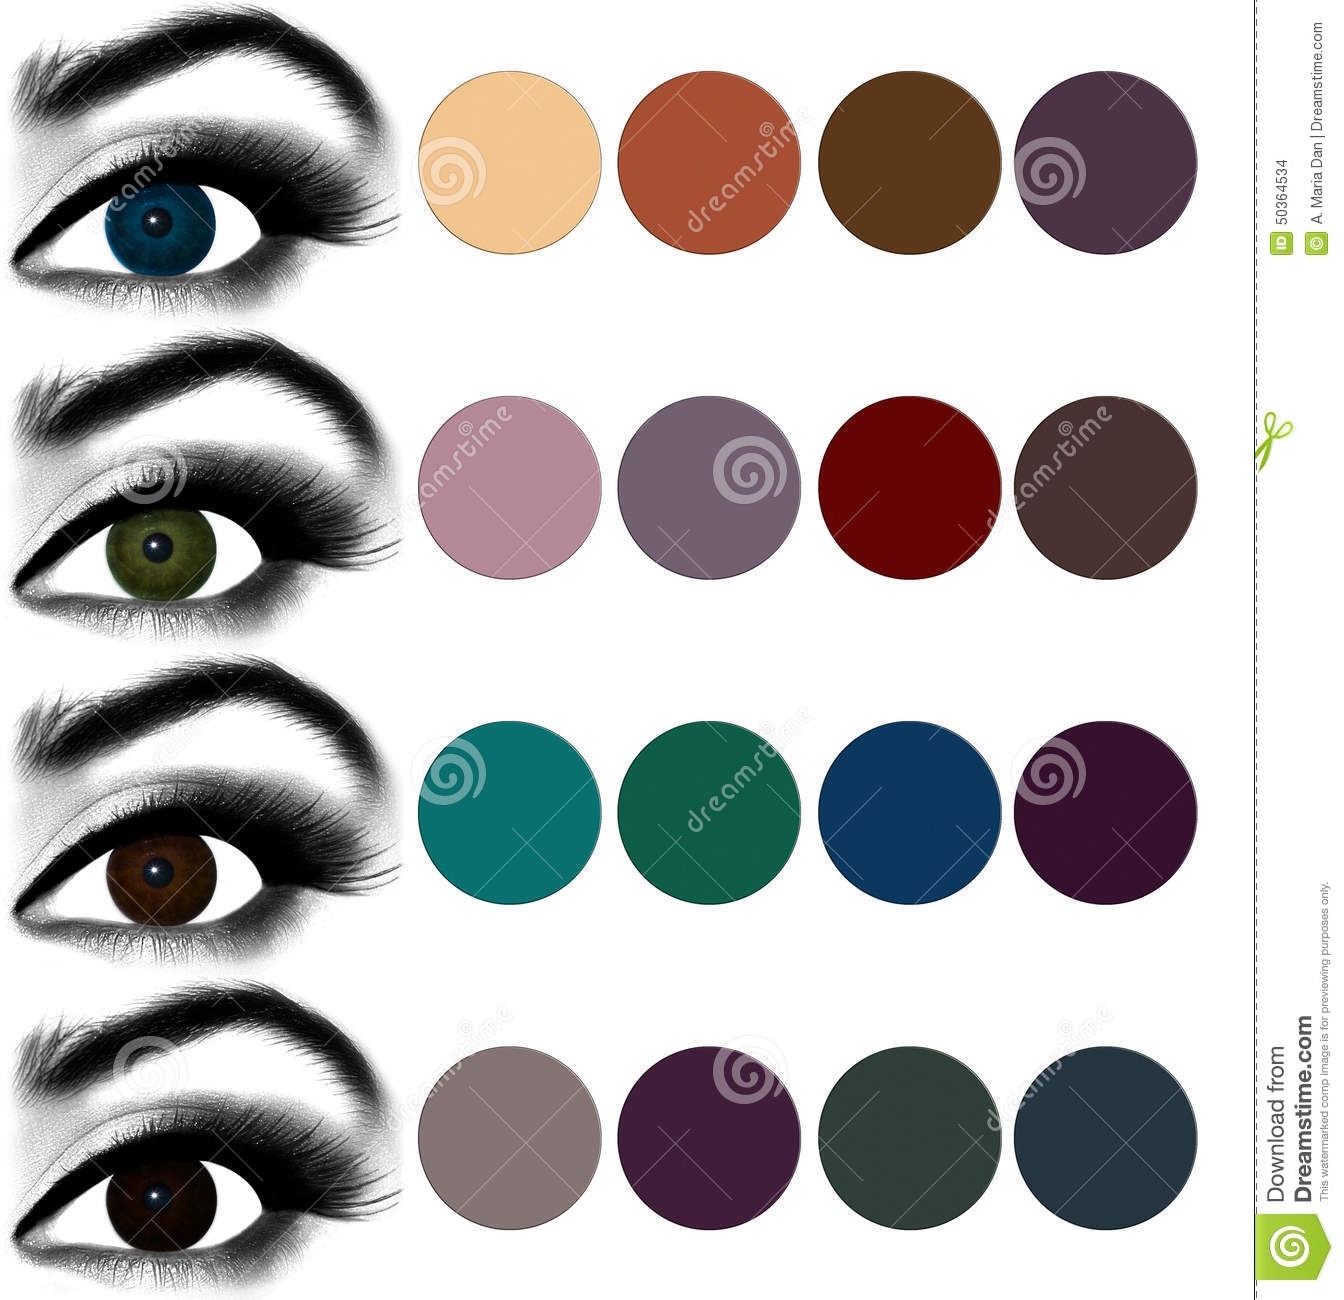 Makeup Colors For Green Eyes | Images throughout Makeup Colors For Green Eyes